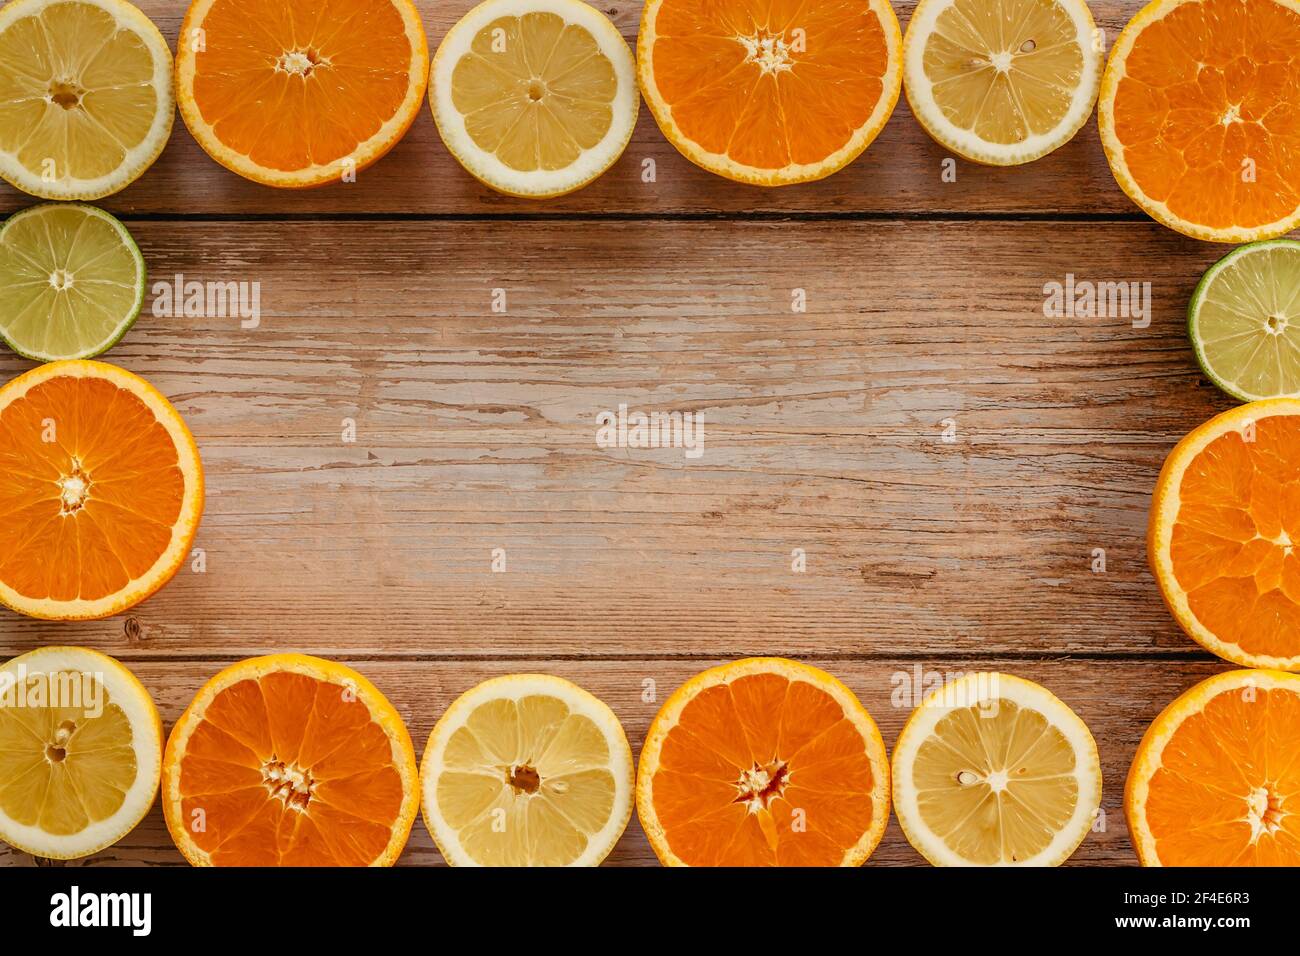 Oranges,limes and lemons slides on wooden table view from above.Beautiful background with fresh fruit half cut.Healthy eating vitamin C.Summer tropica Stock Photo